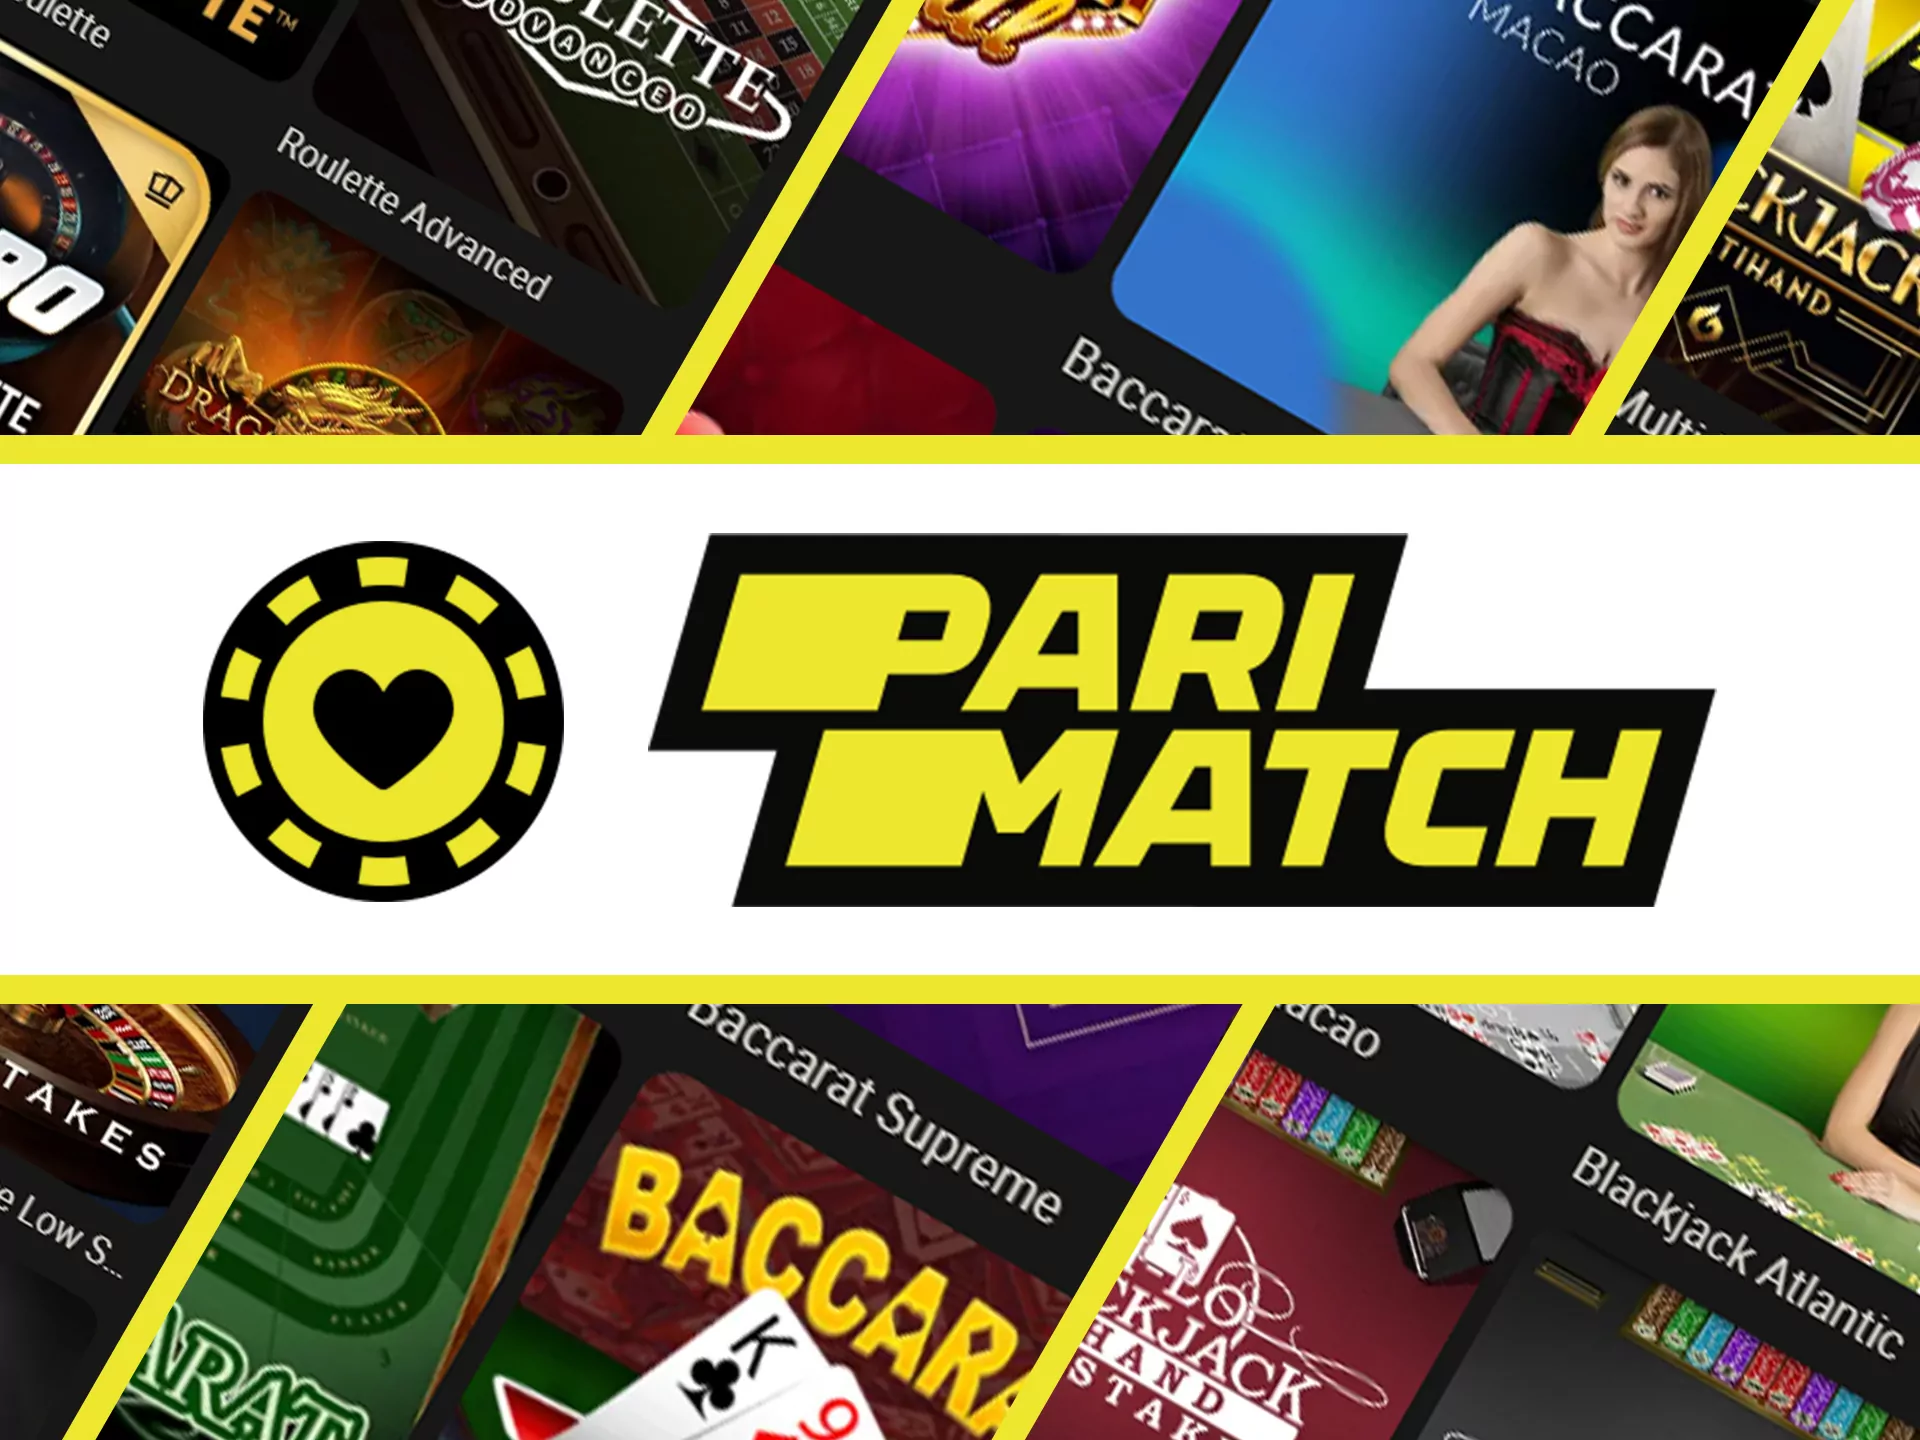 I Don't Want To Spend This Much Time On parimatch. How About You?